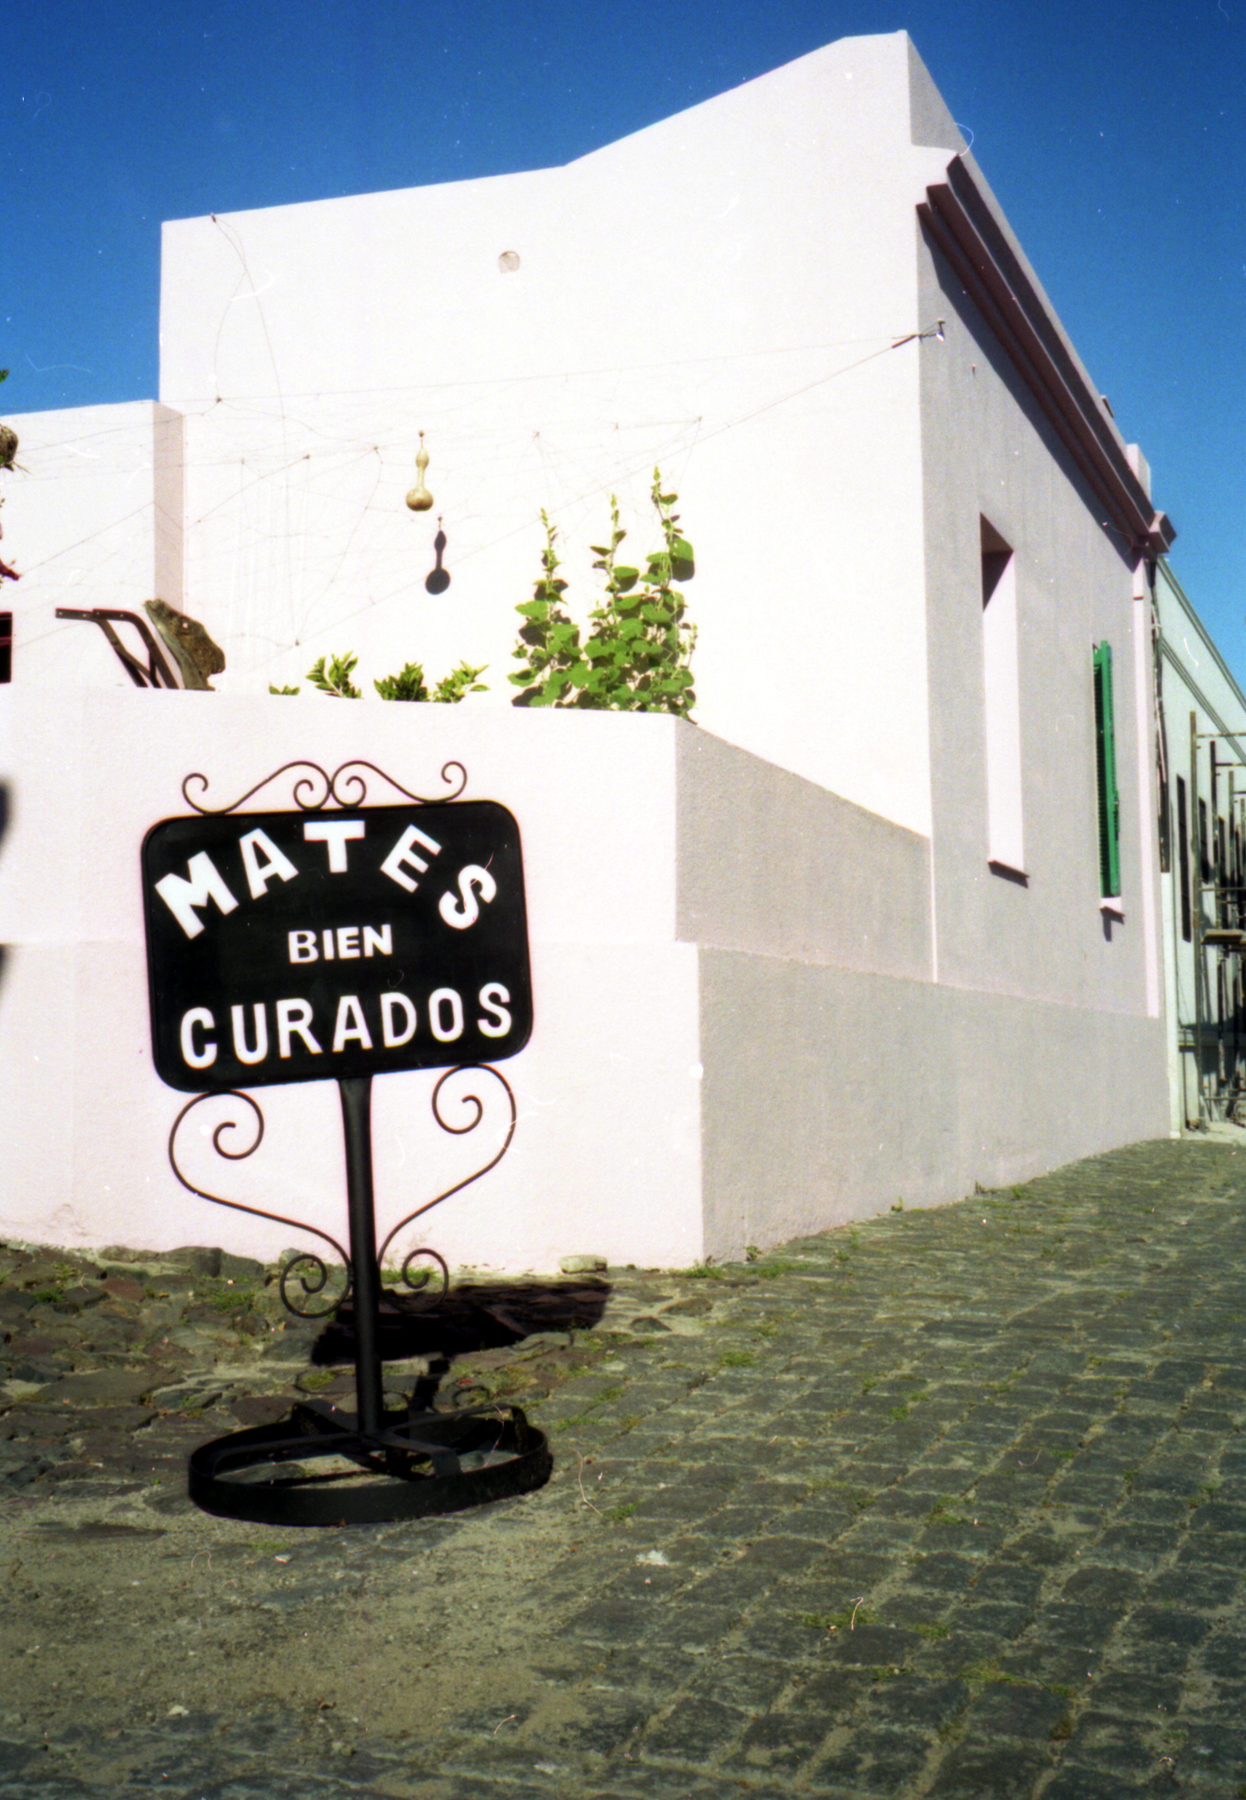 a black sign is by a building and cobblestone area